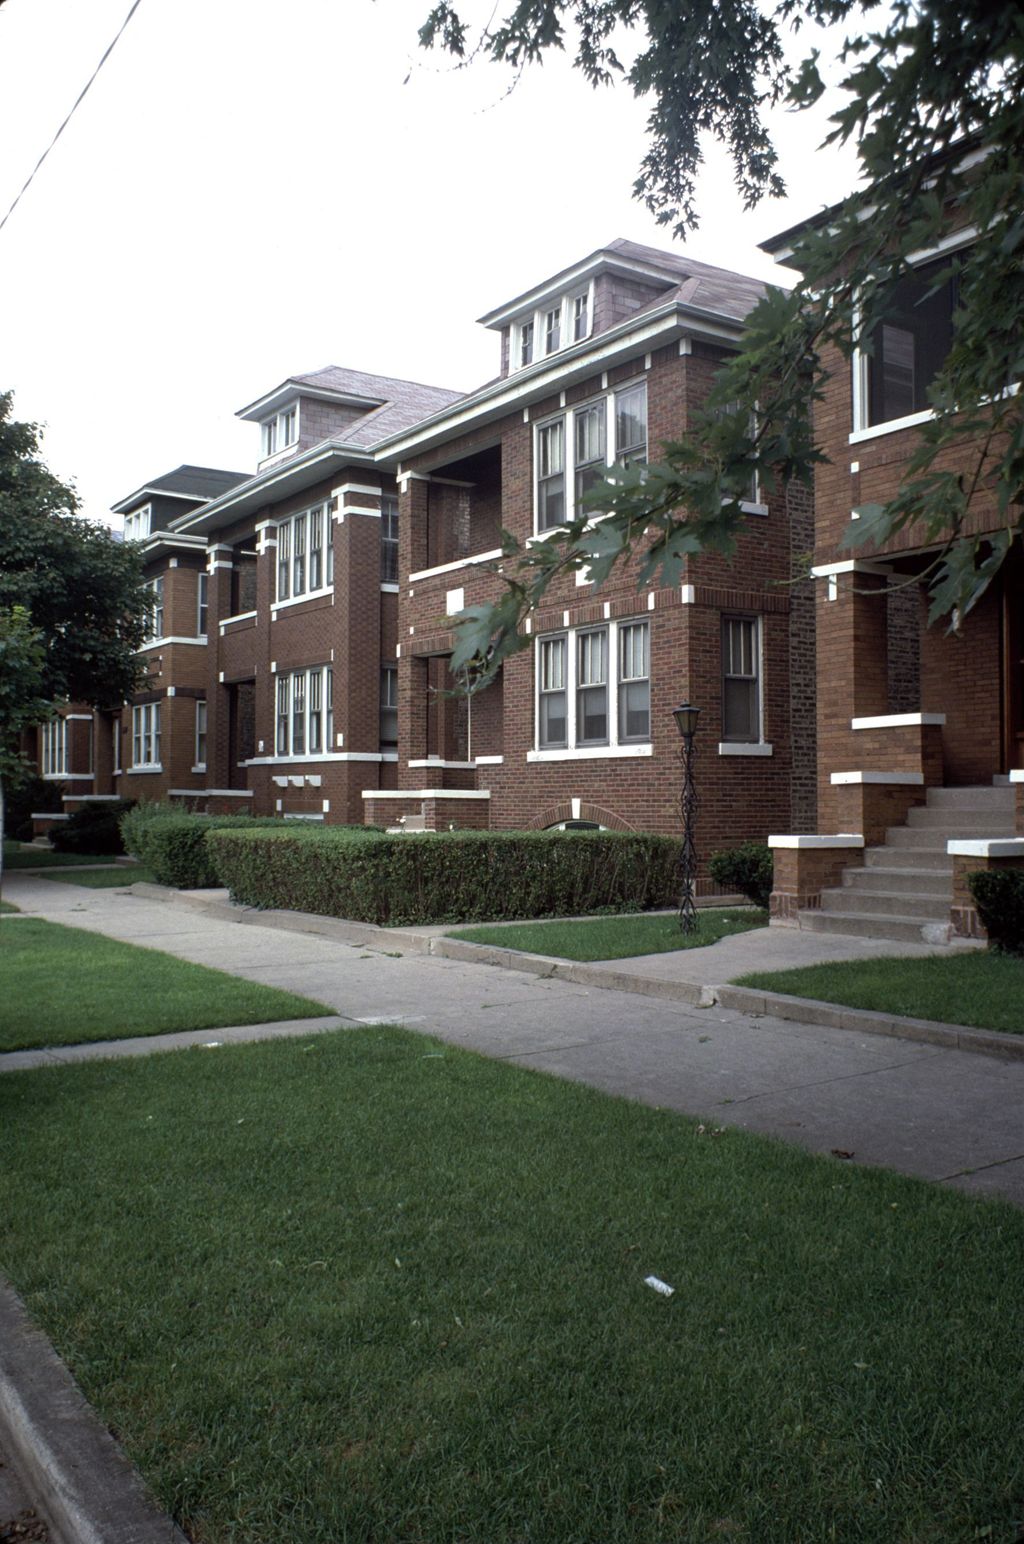 Two-flats, South Artesian Avenue, Chicago Lawn